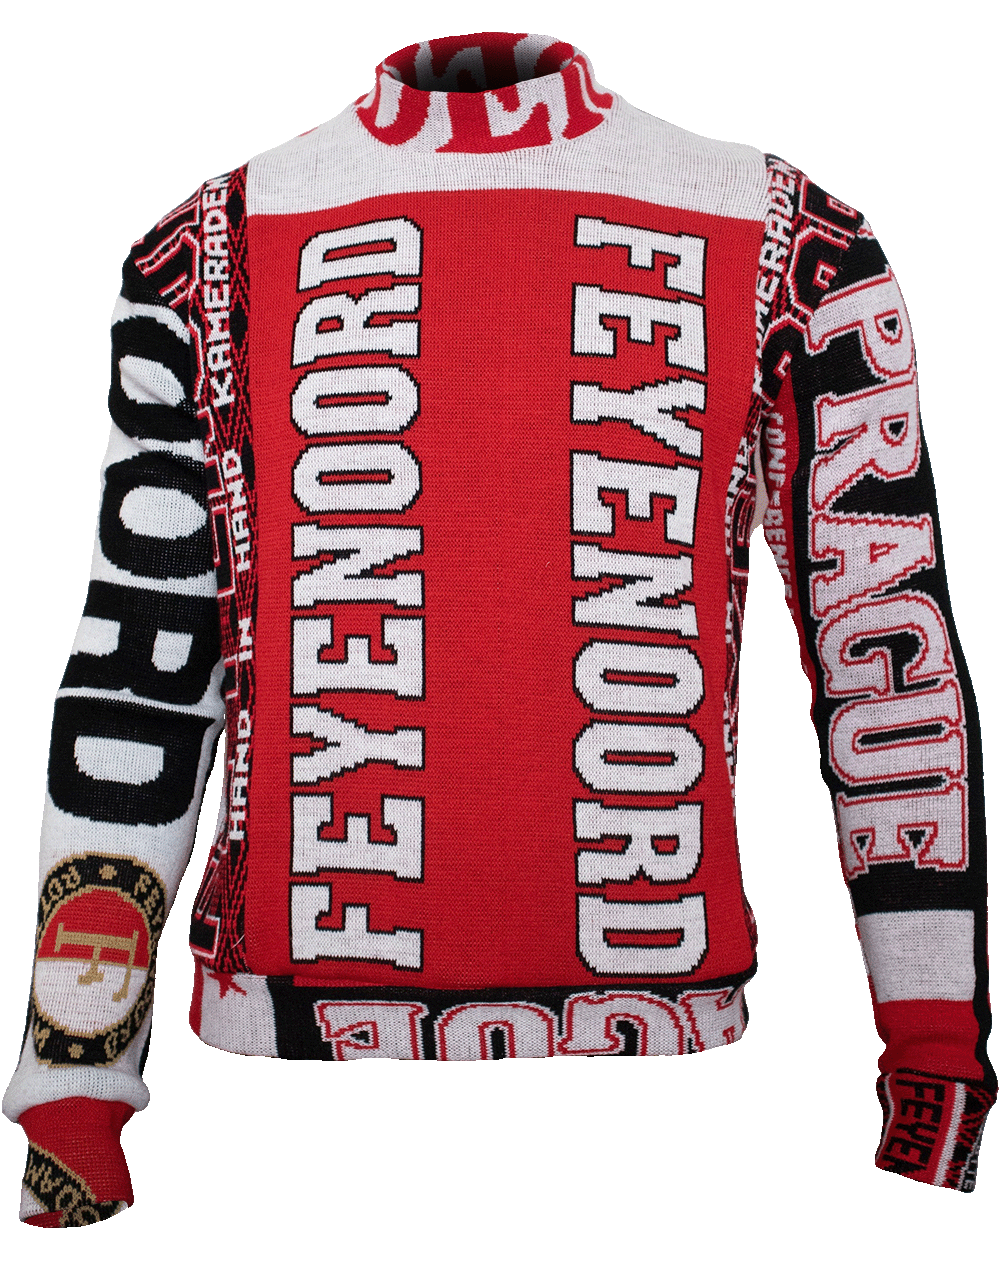 Red and white feyenoord together sweater